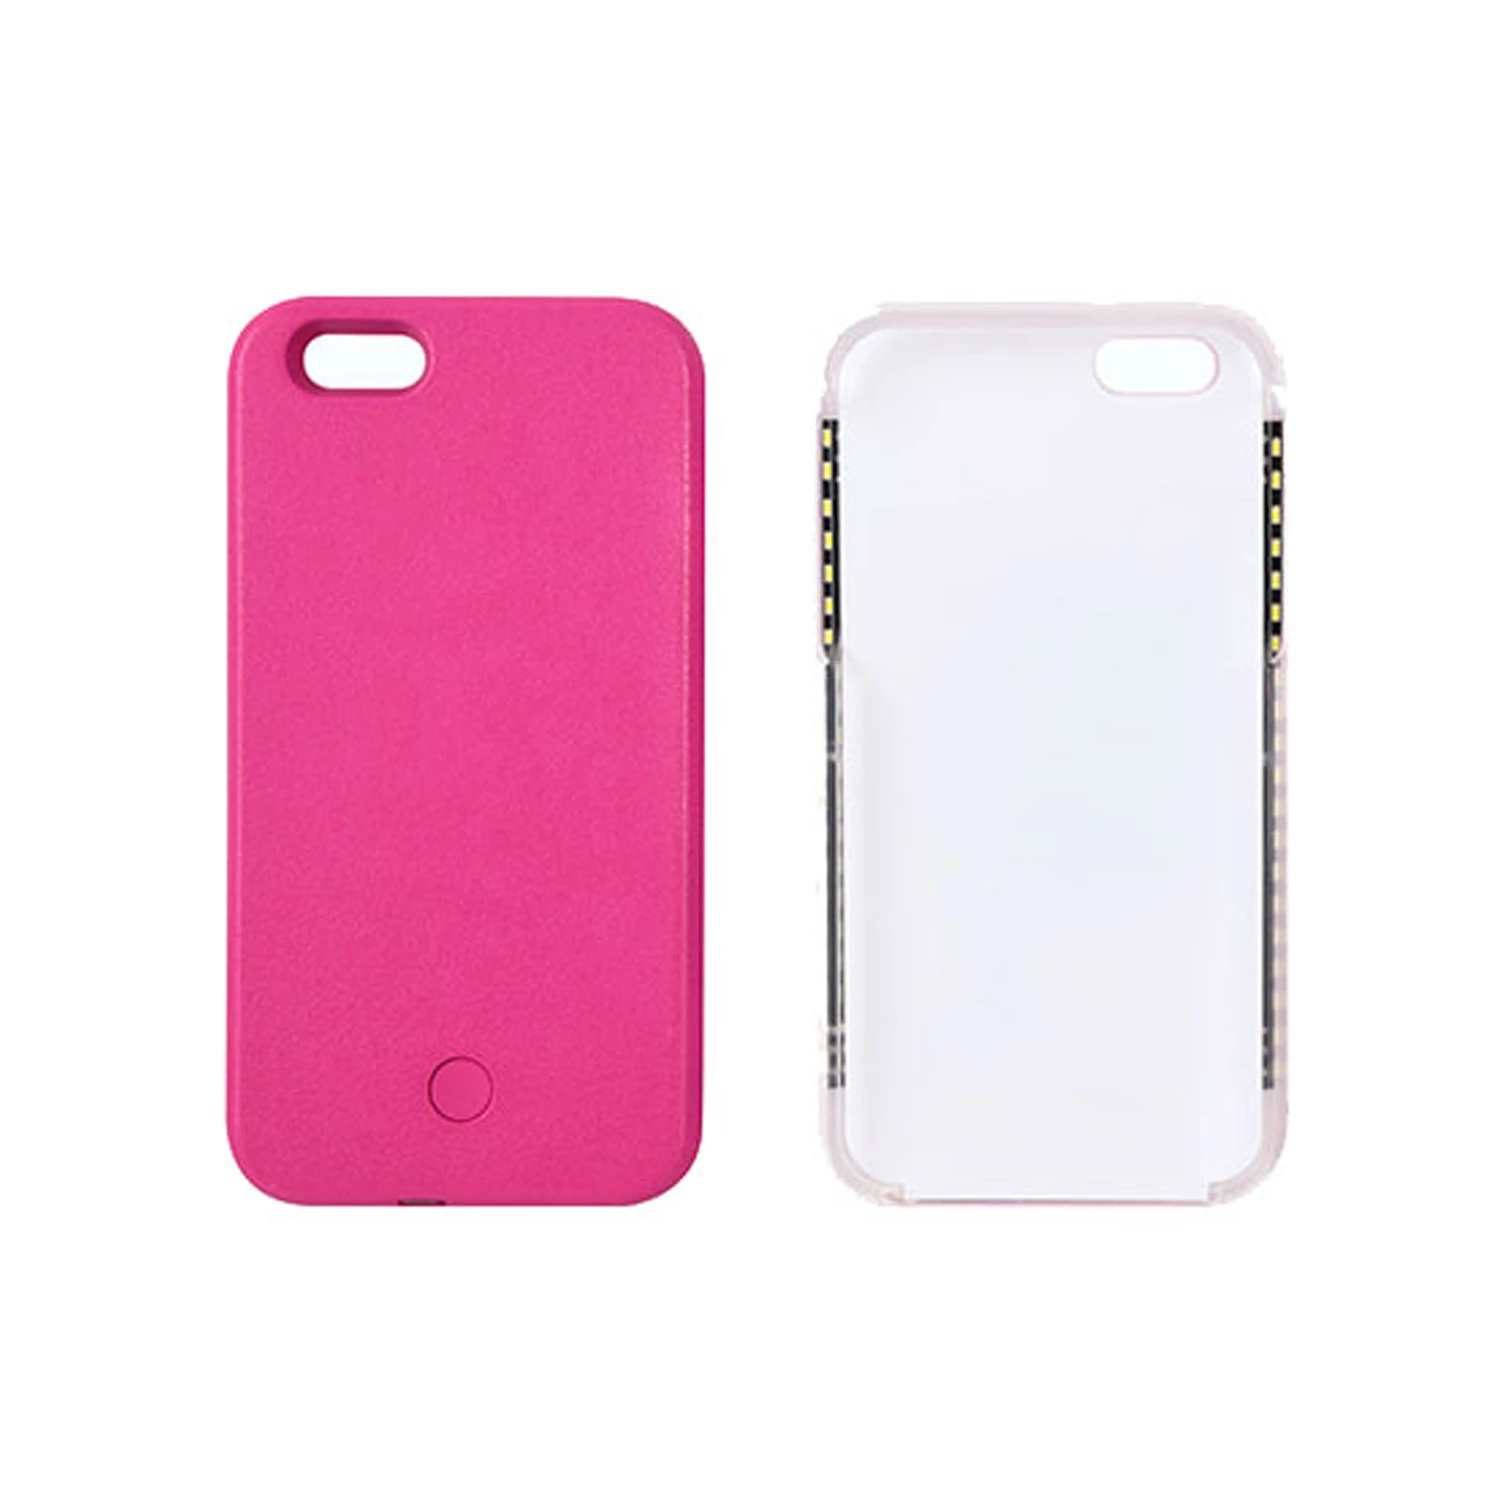 LED Light-Up Phone Case Cover For iPhone 6/6S